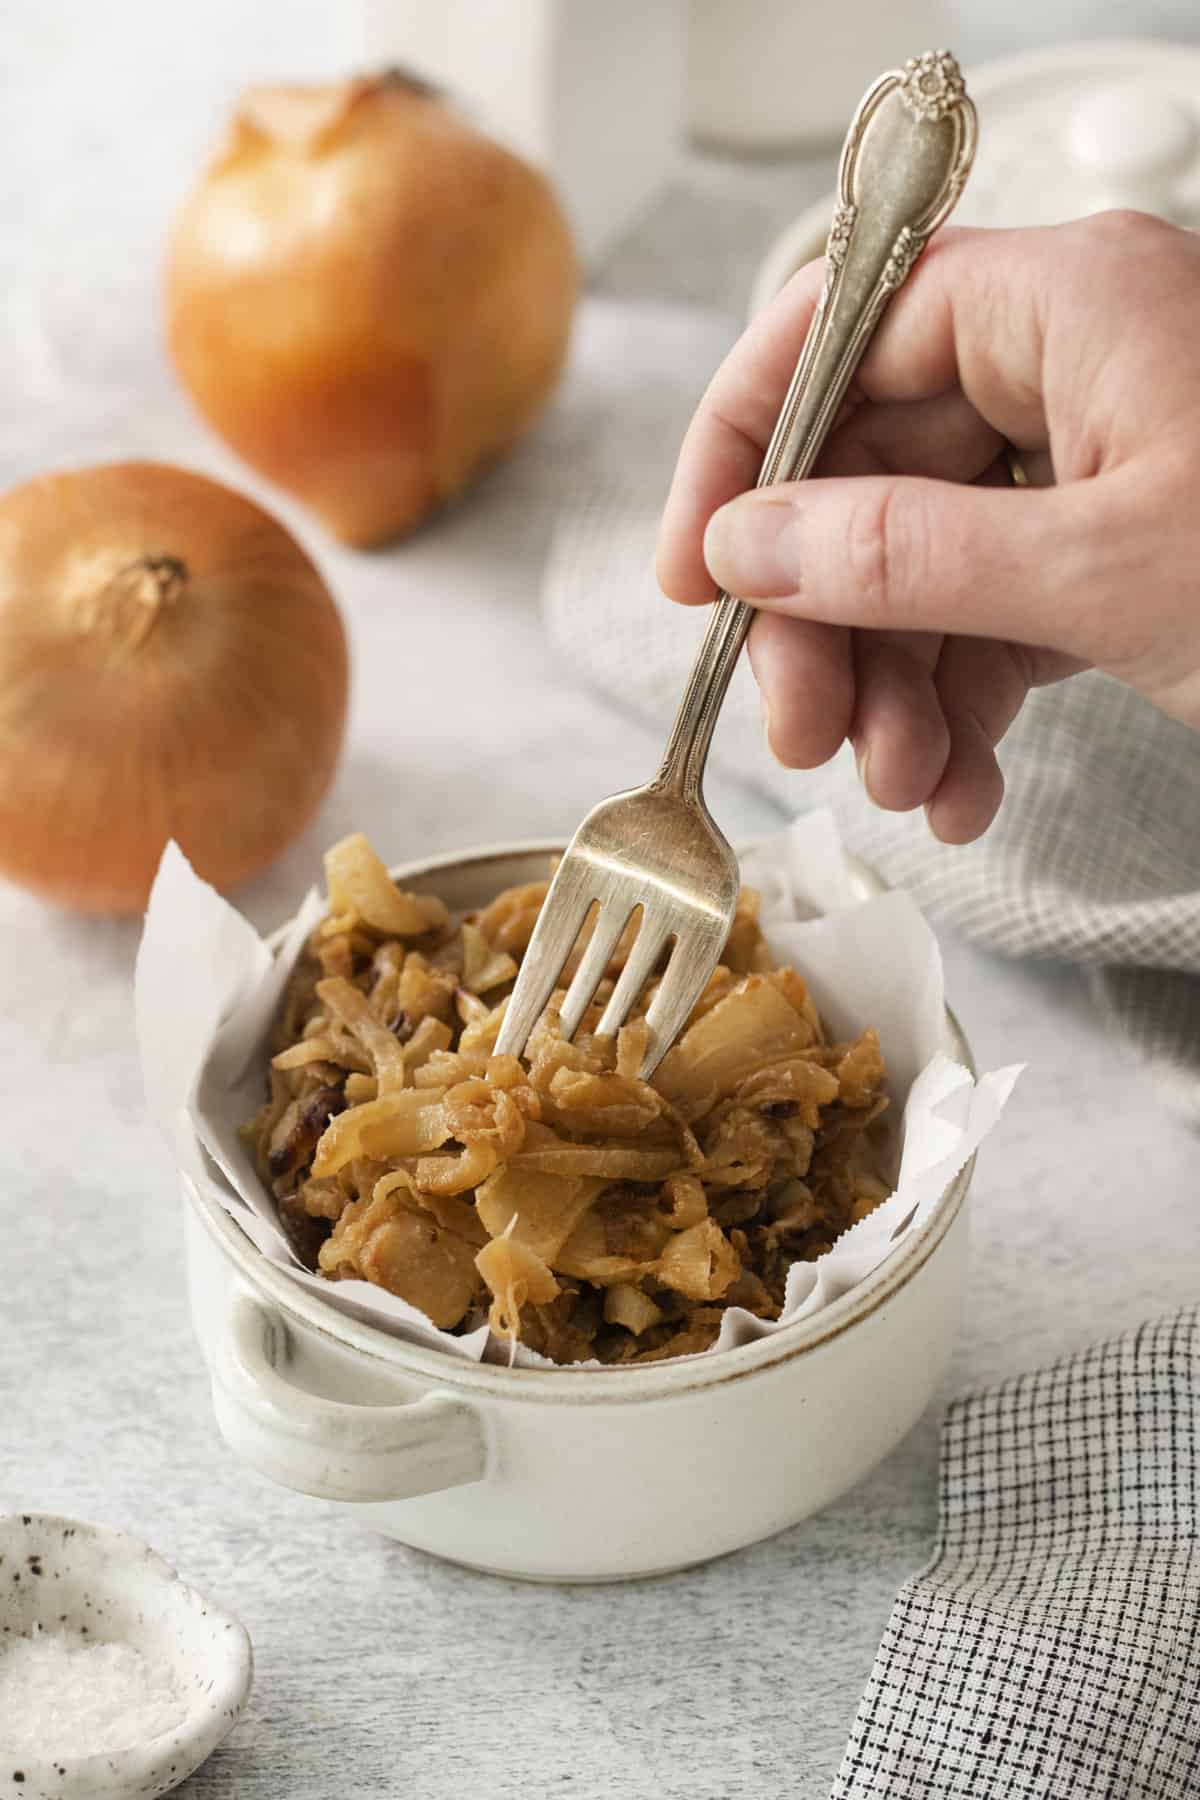 a fork being plunged into a bowl filled with caramelized onions.